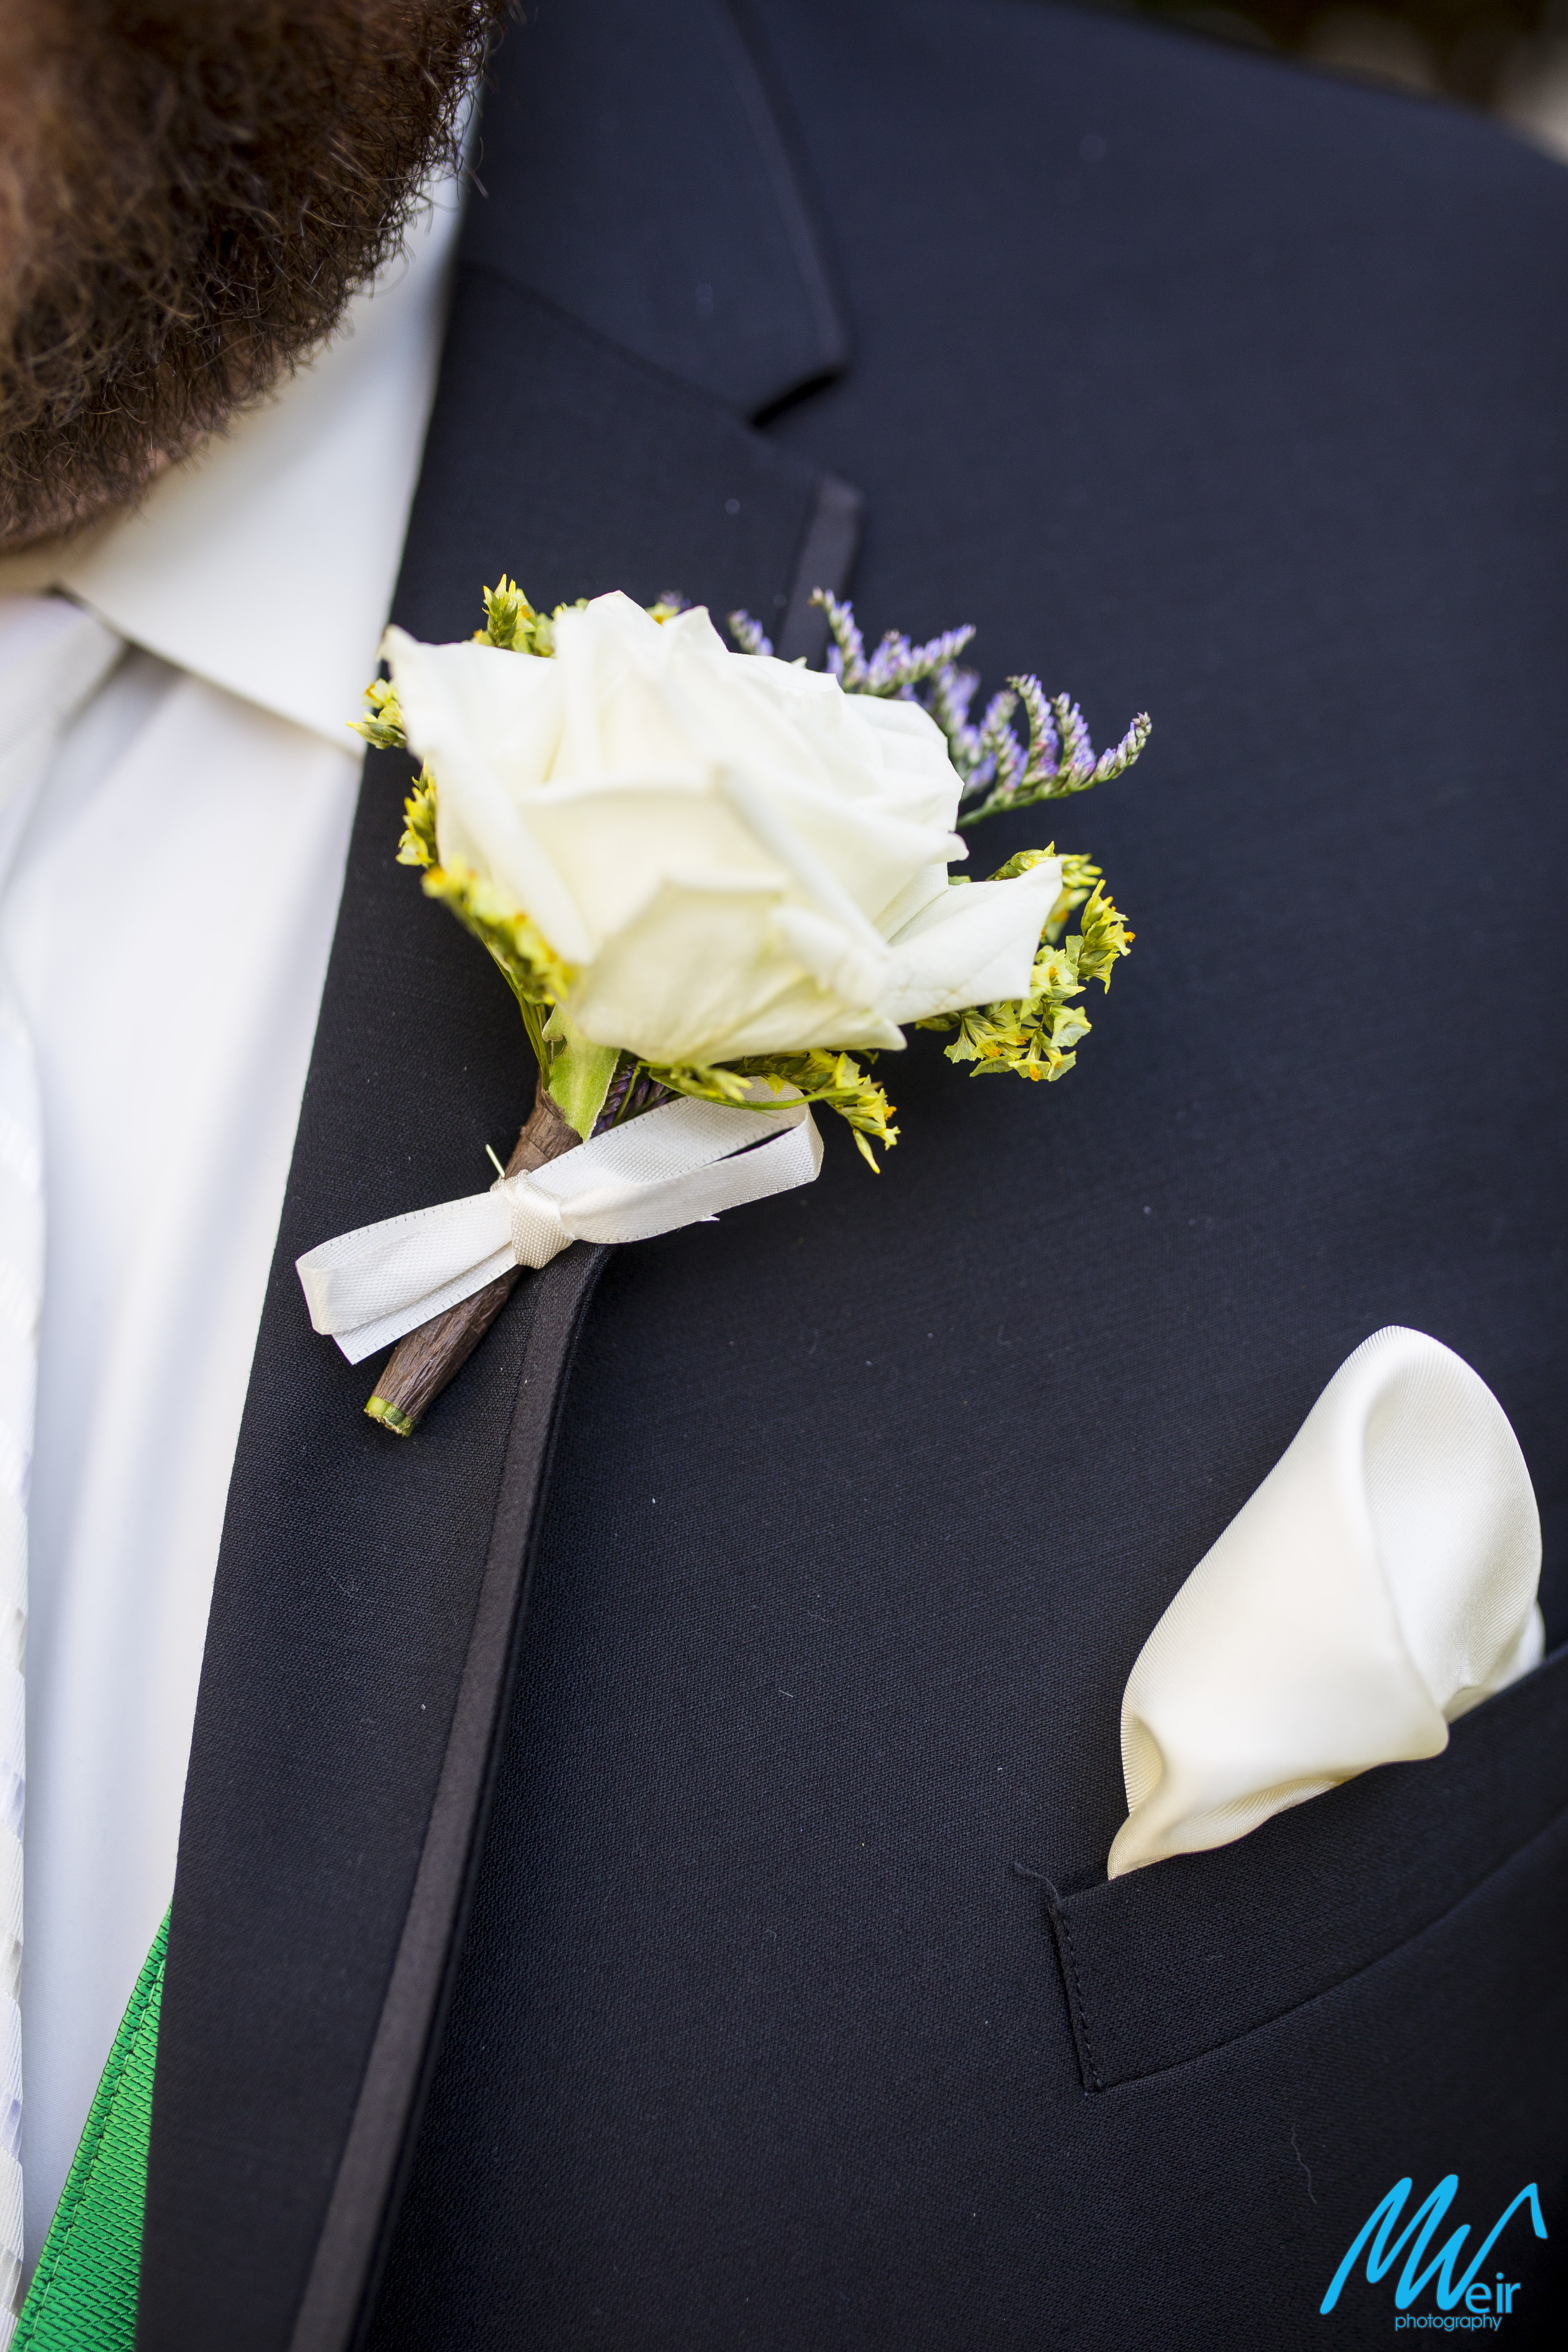 detail of the grooms lapel and boutonniere